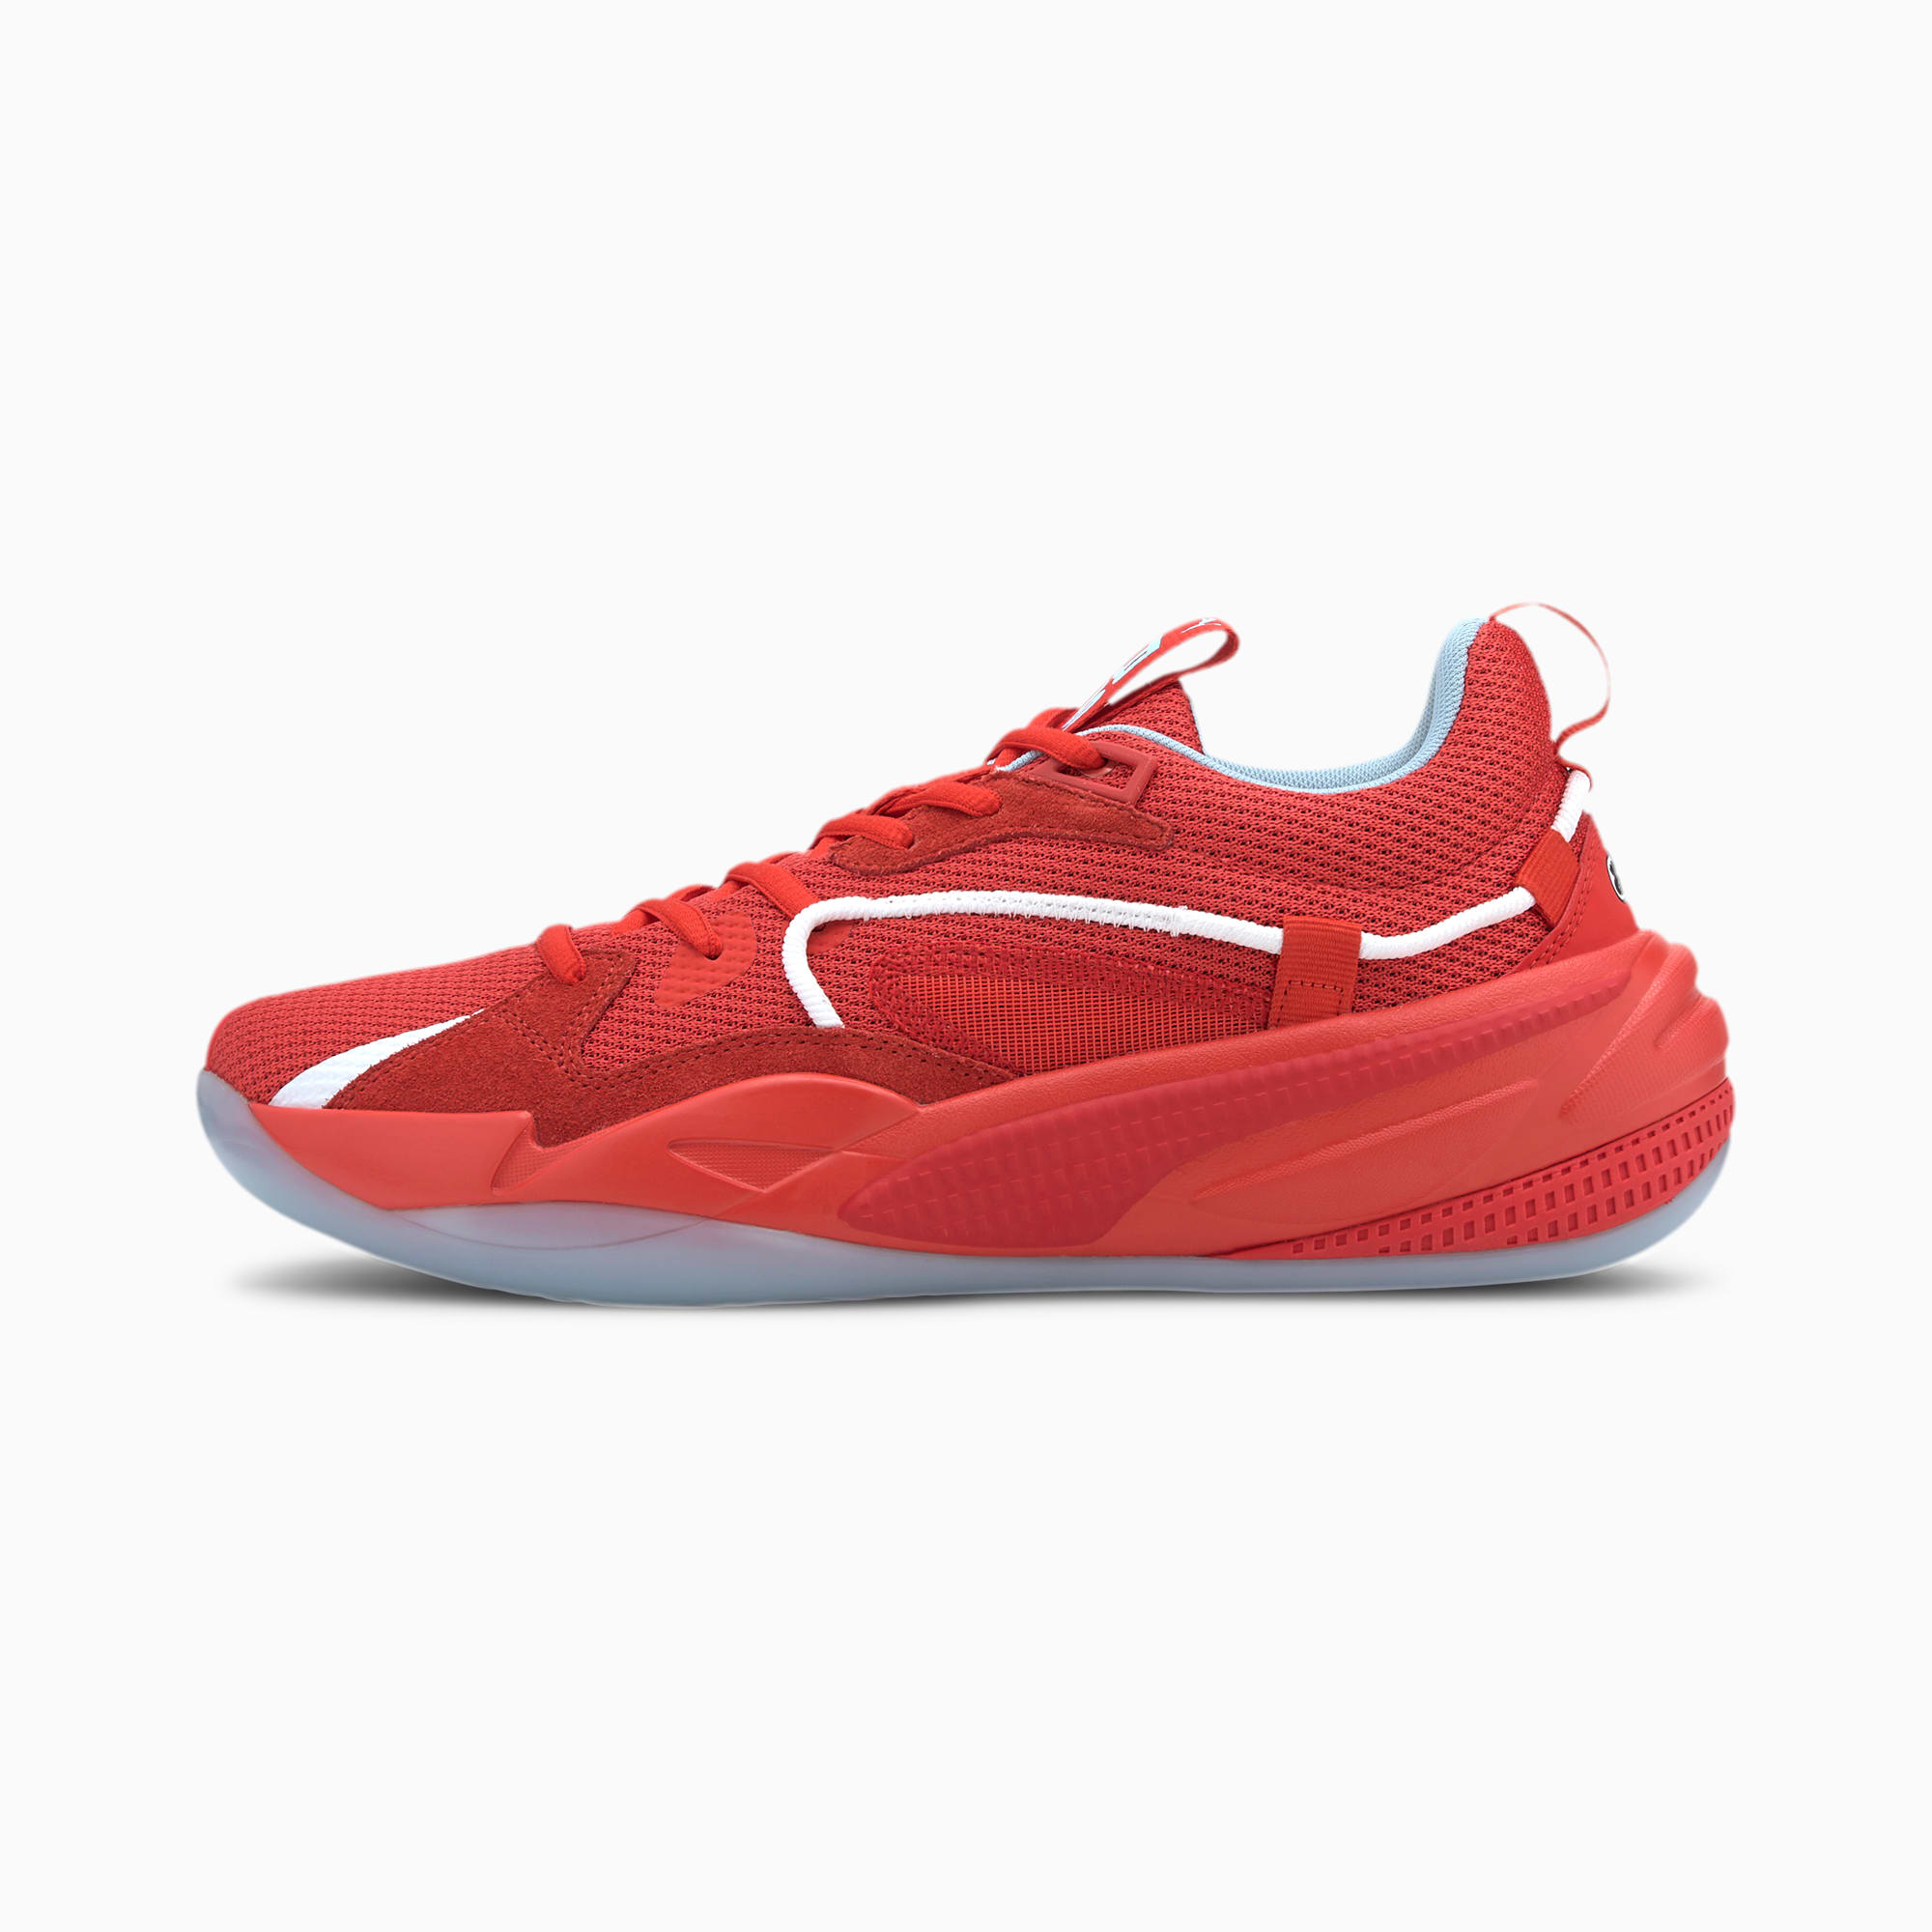 PUMA Chaussure de basket RS-Dreamer Blood, Sweat and Tears, Rouge, Taille 44.5, Chaussures